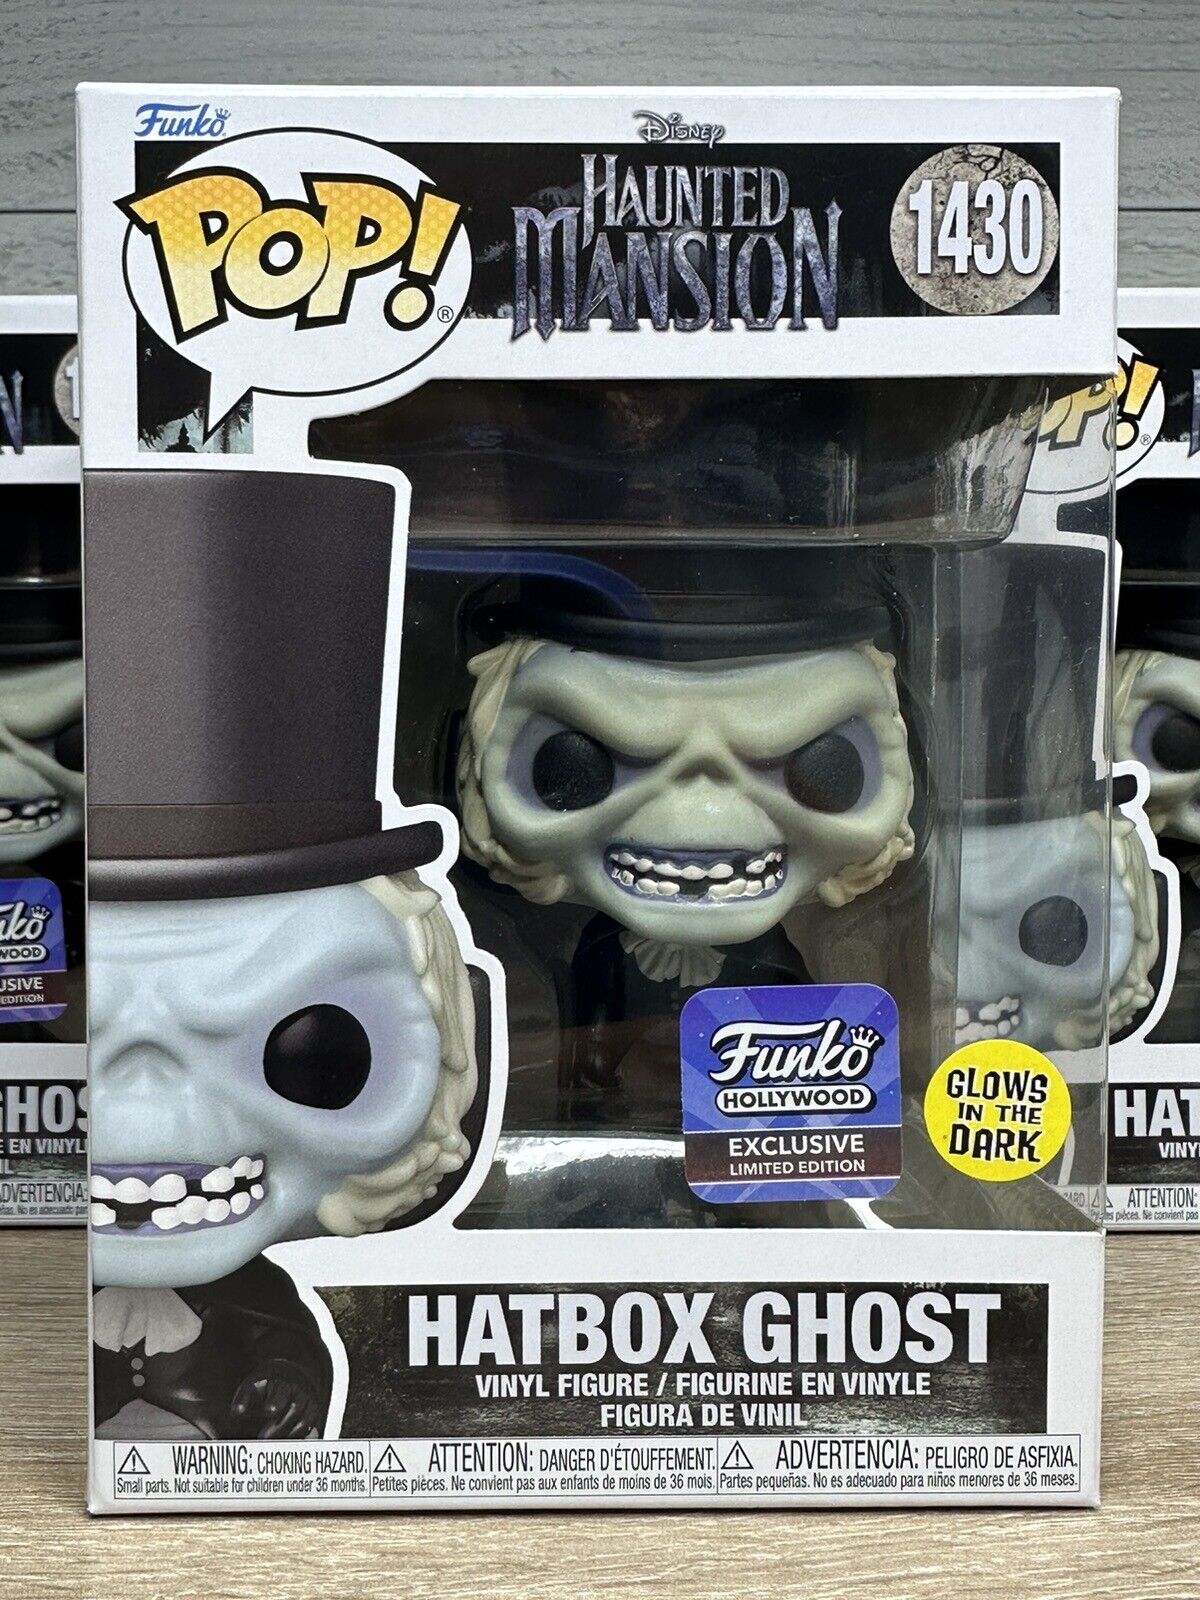 FUNKO POP HATBOX GHOST #1430 DISNEY HAUNTED MANSION GLOW HOLLYWOOD EXCLUSIVE